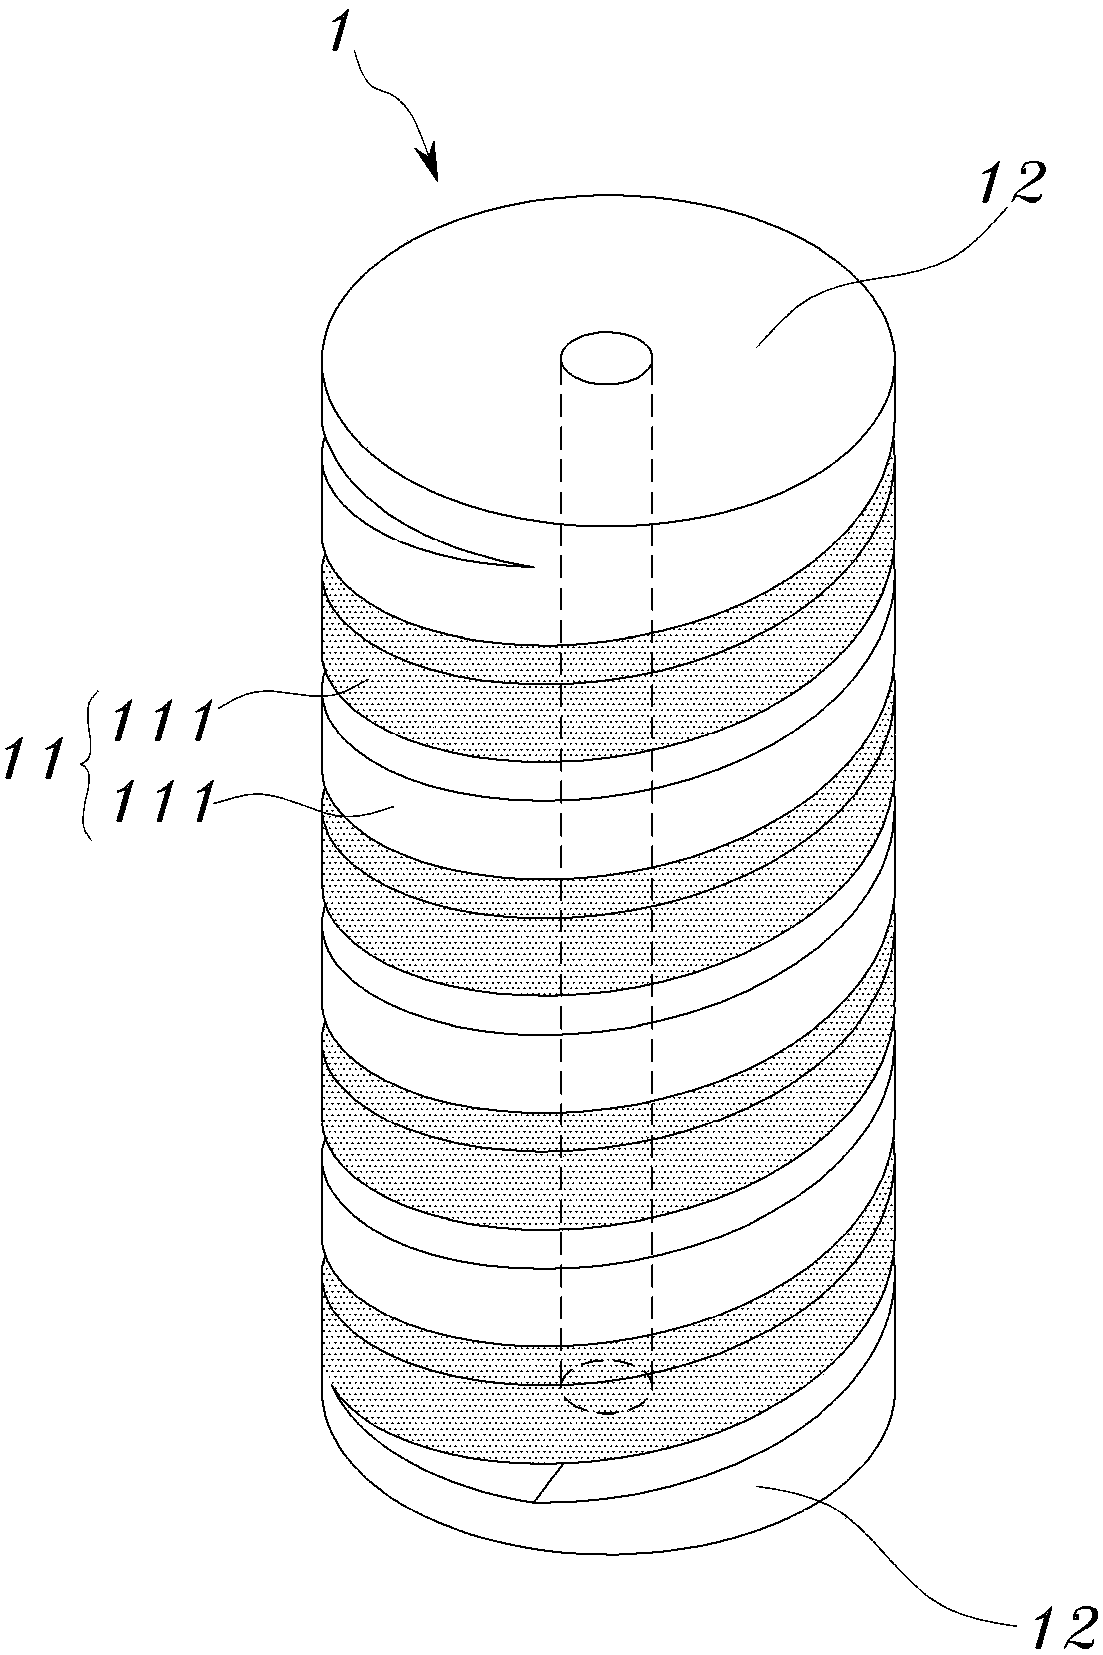 Spring structure having multiple coil-shaped unit springs and method for manufacturing same